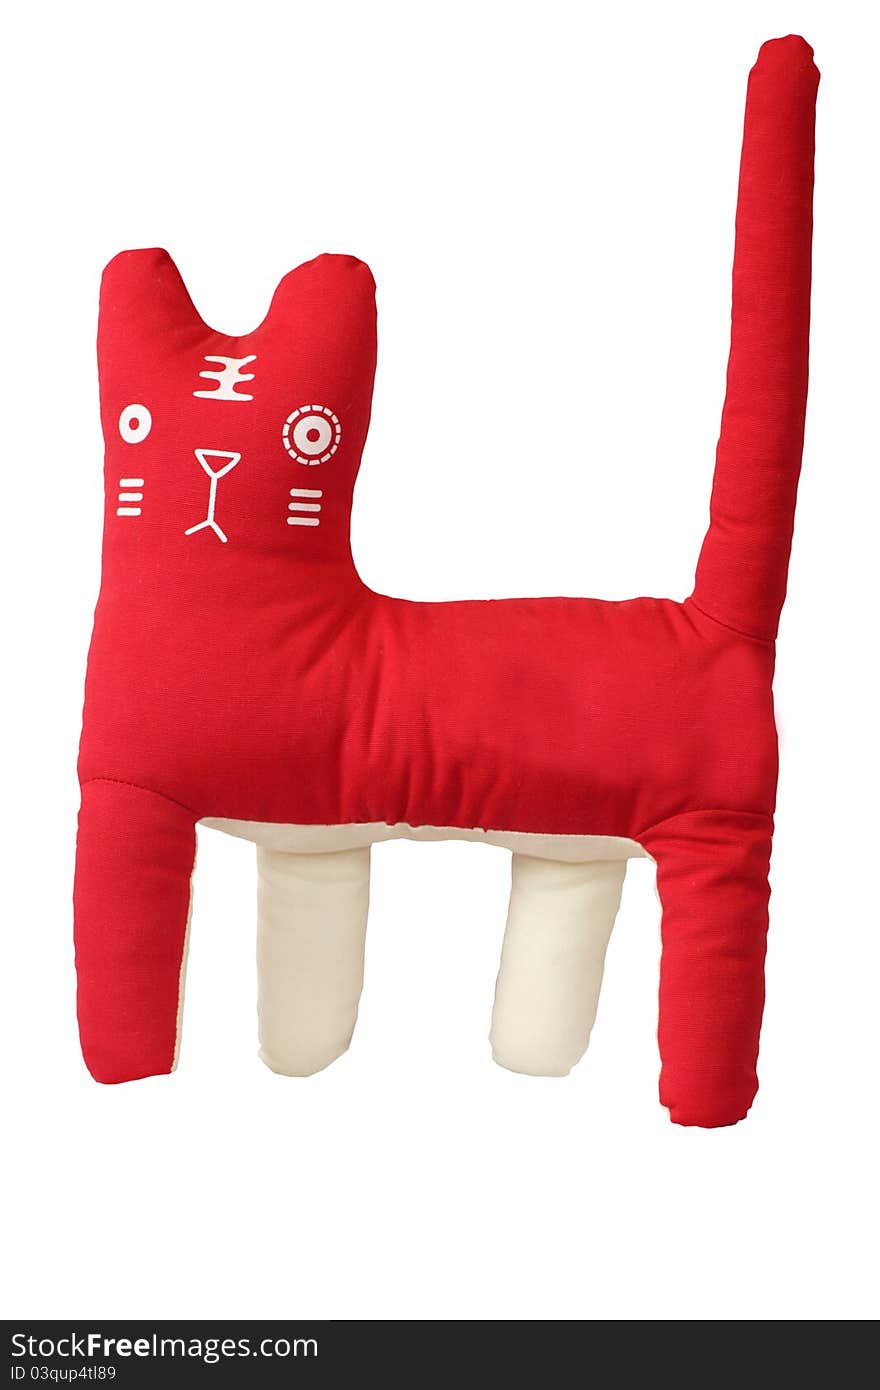 Red happy cat toy pillow